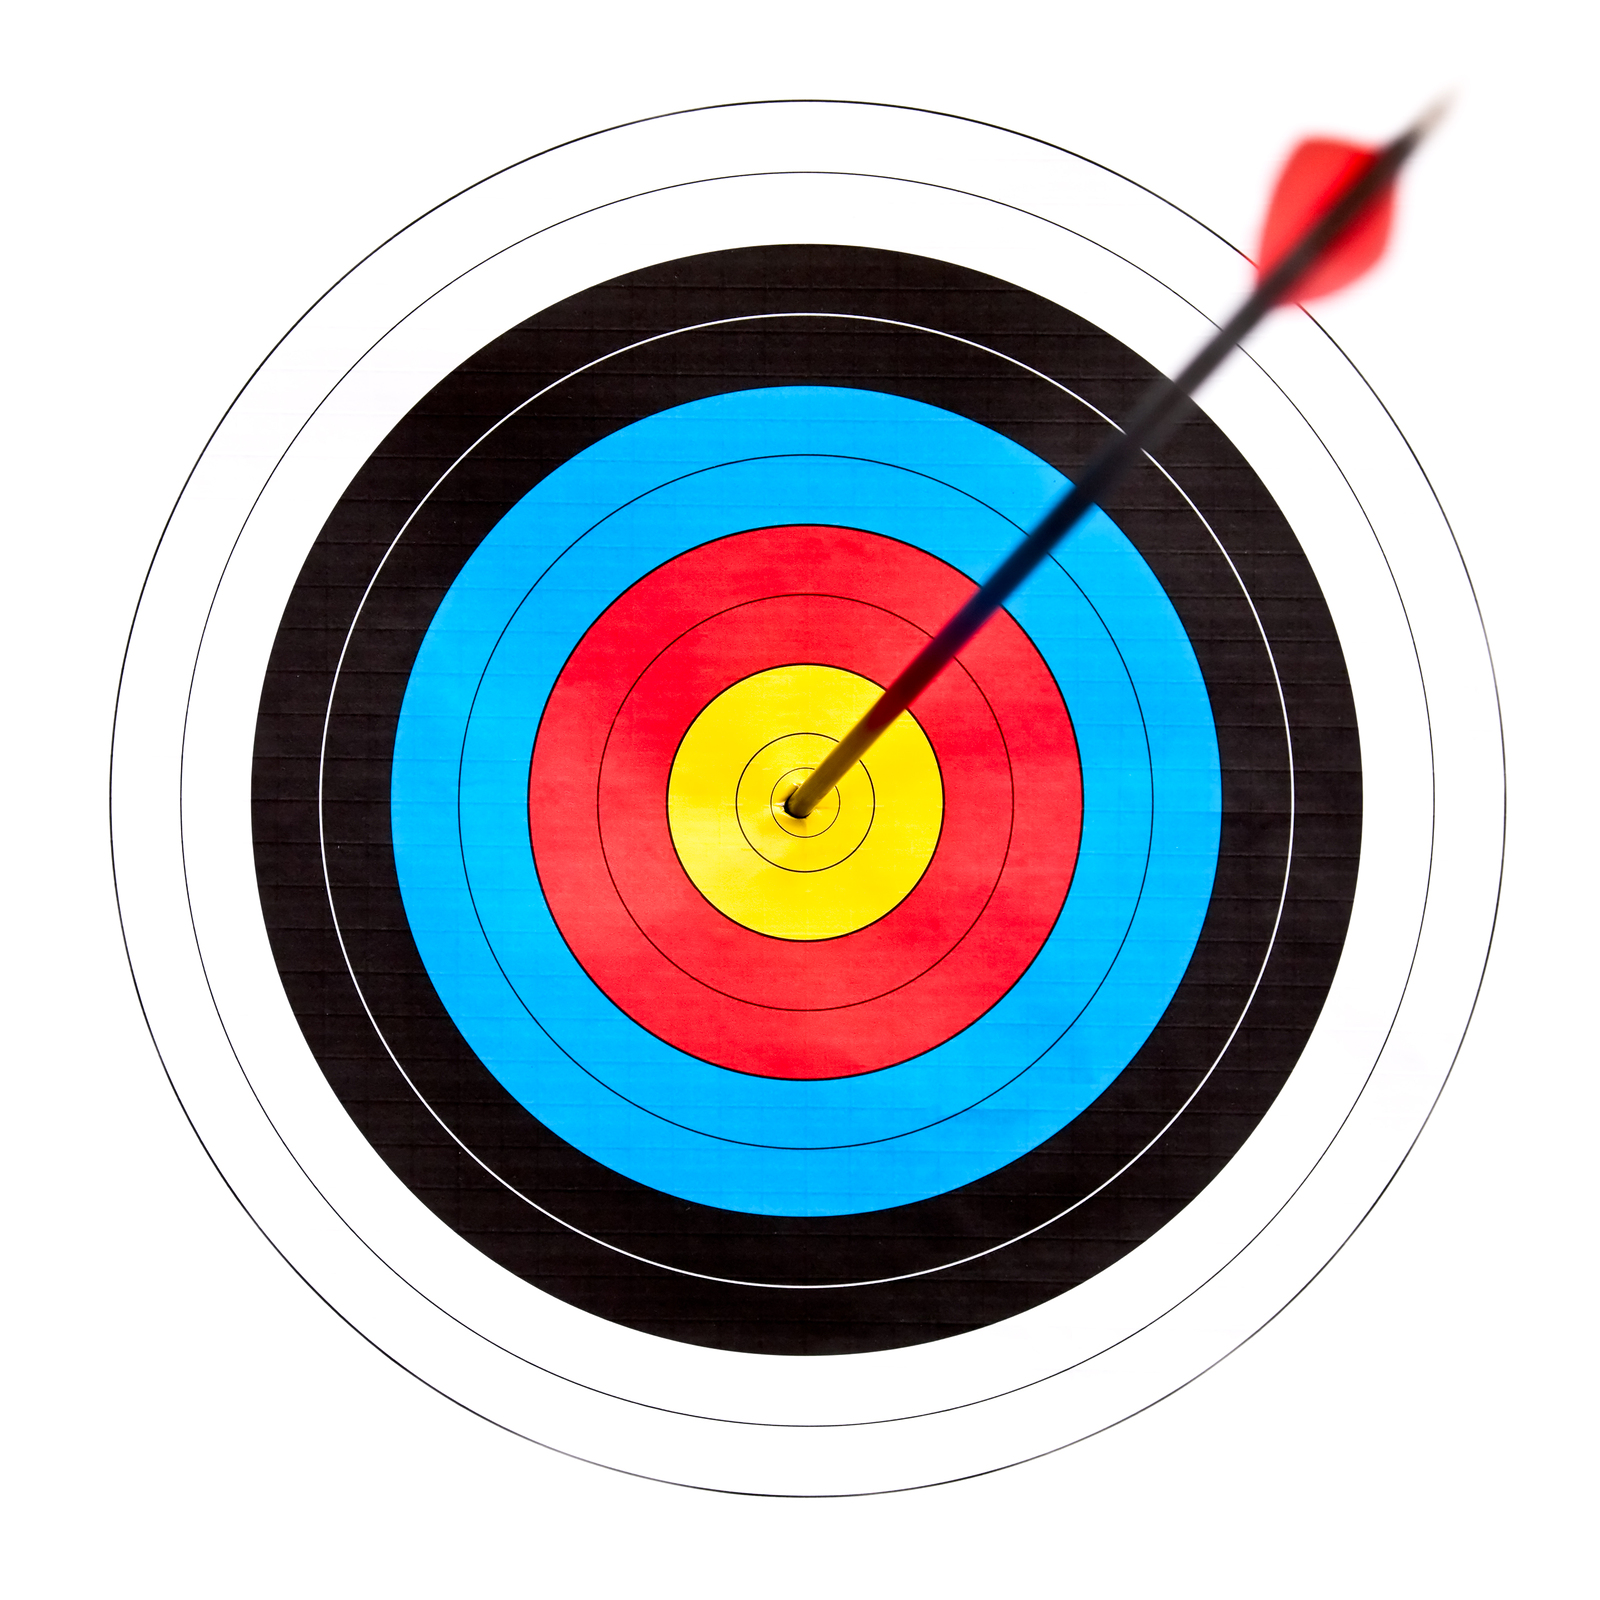 Archery Target Pictures Free Cliparts That You Can Download To You